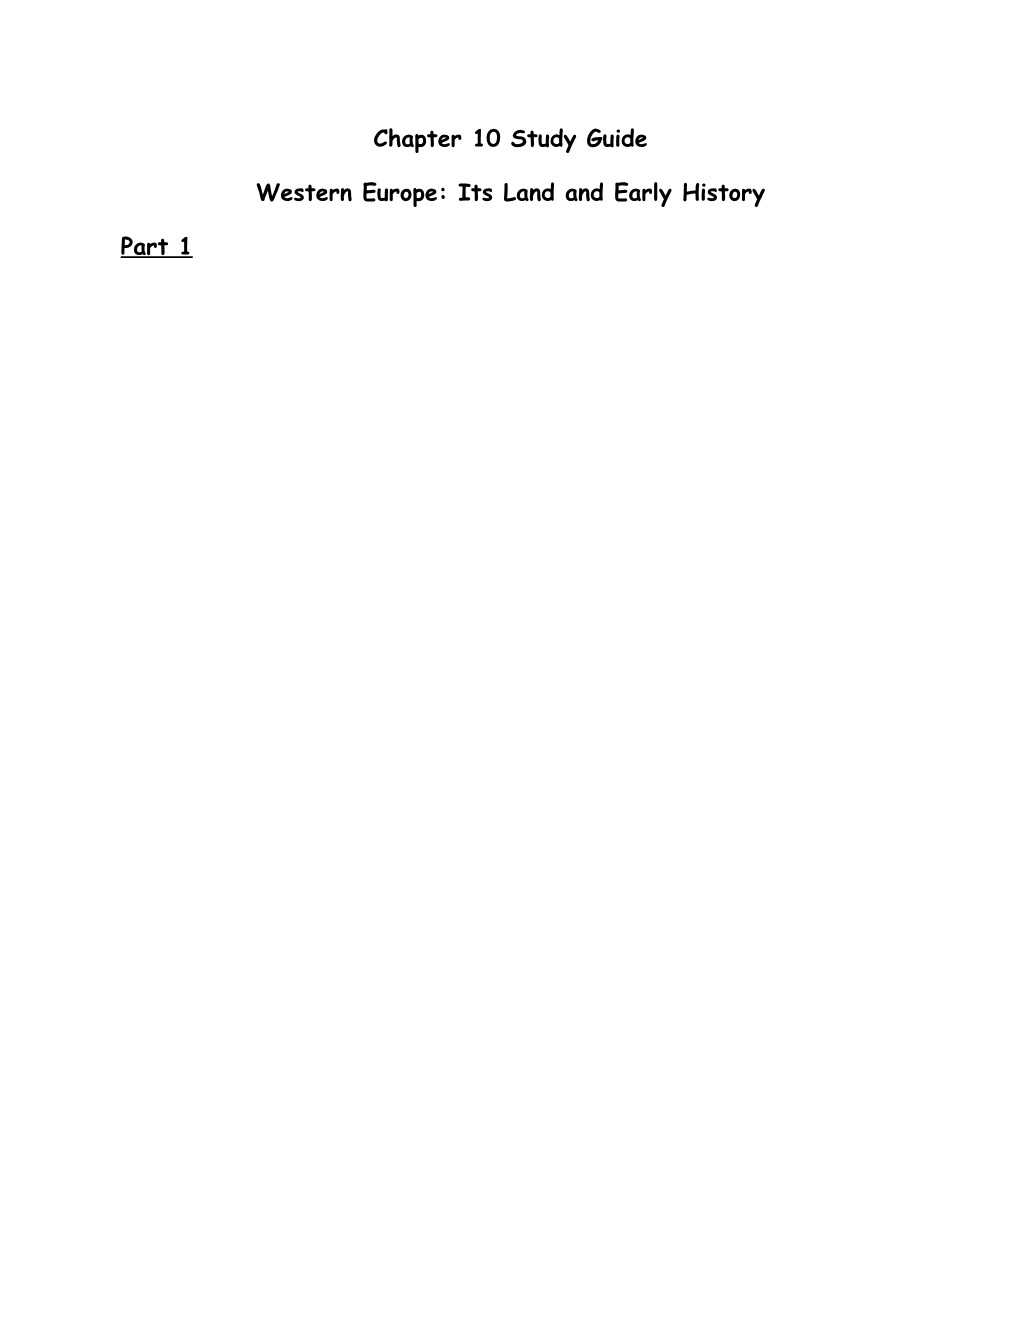 Western Europe: Its Land and Early History